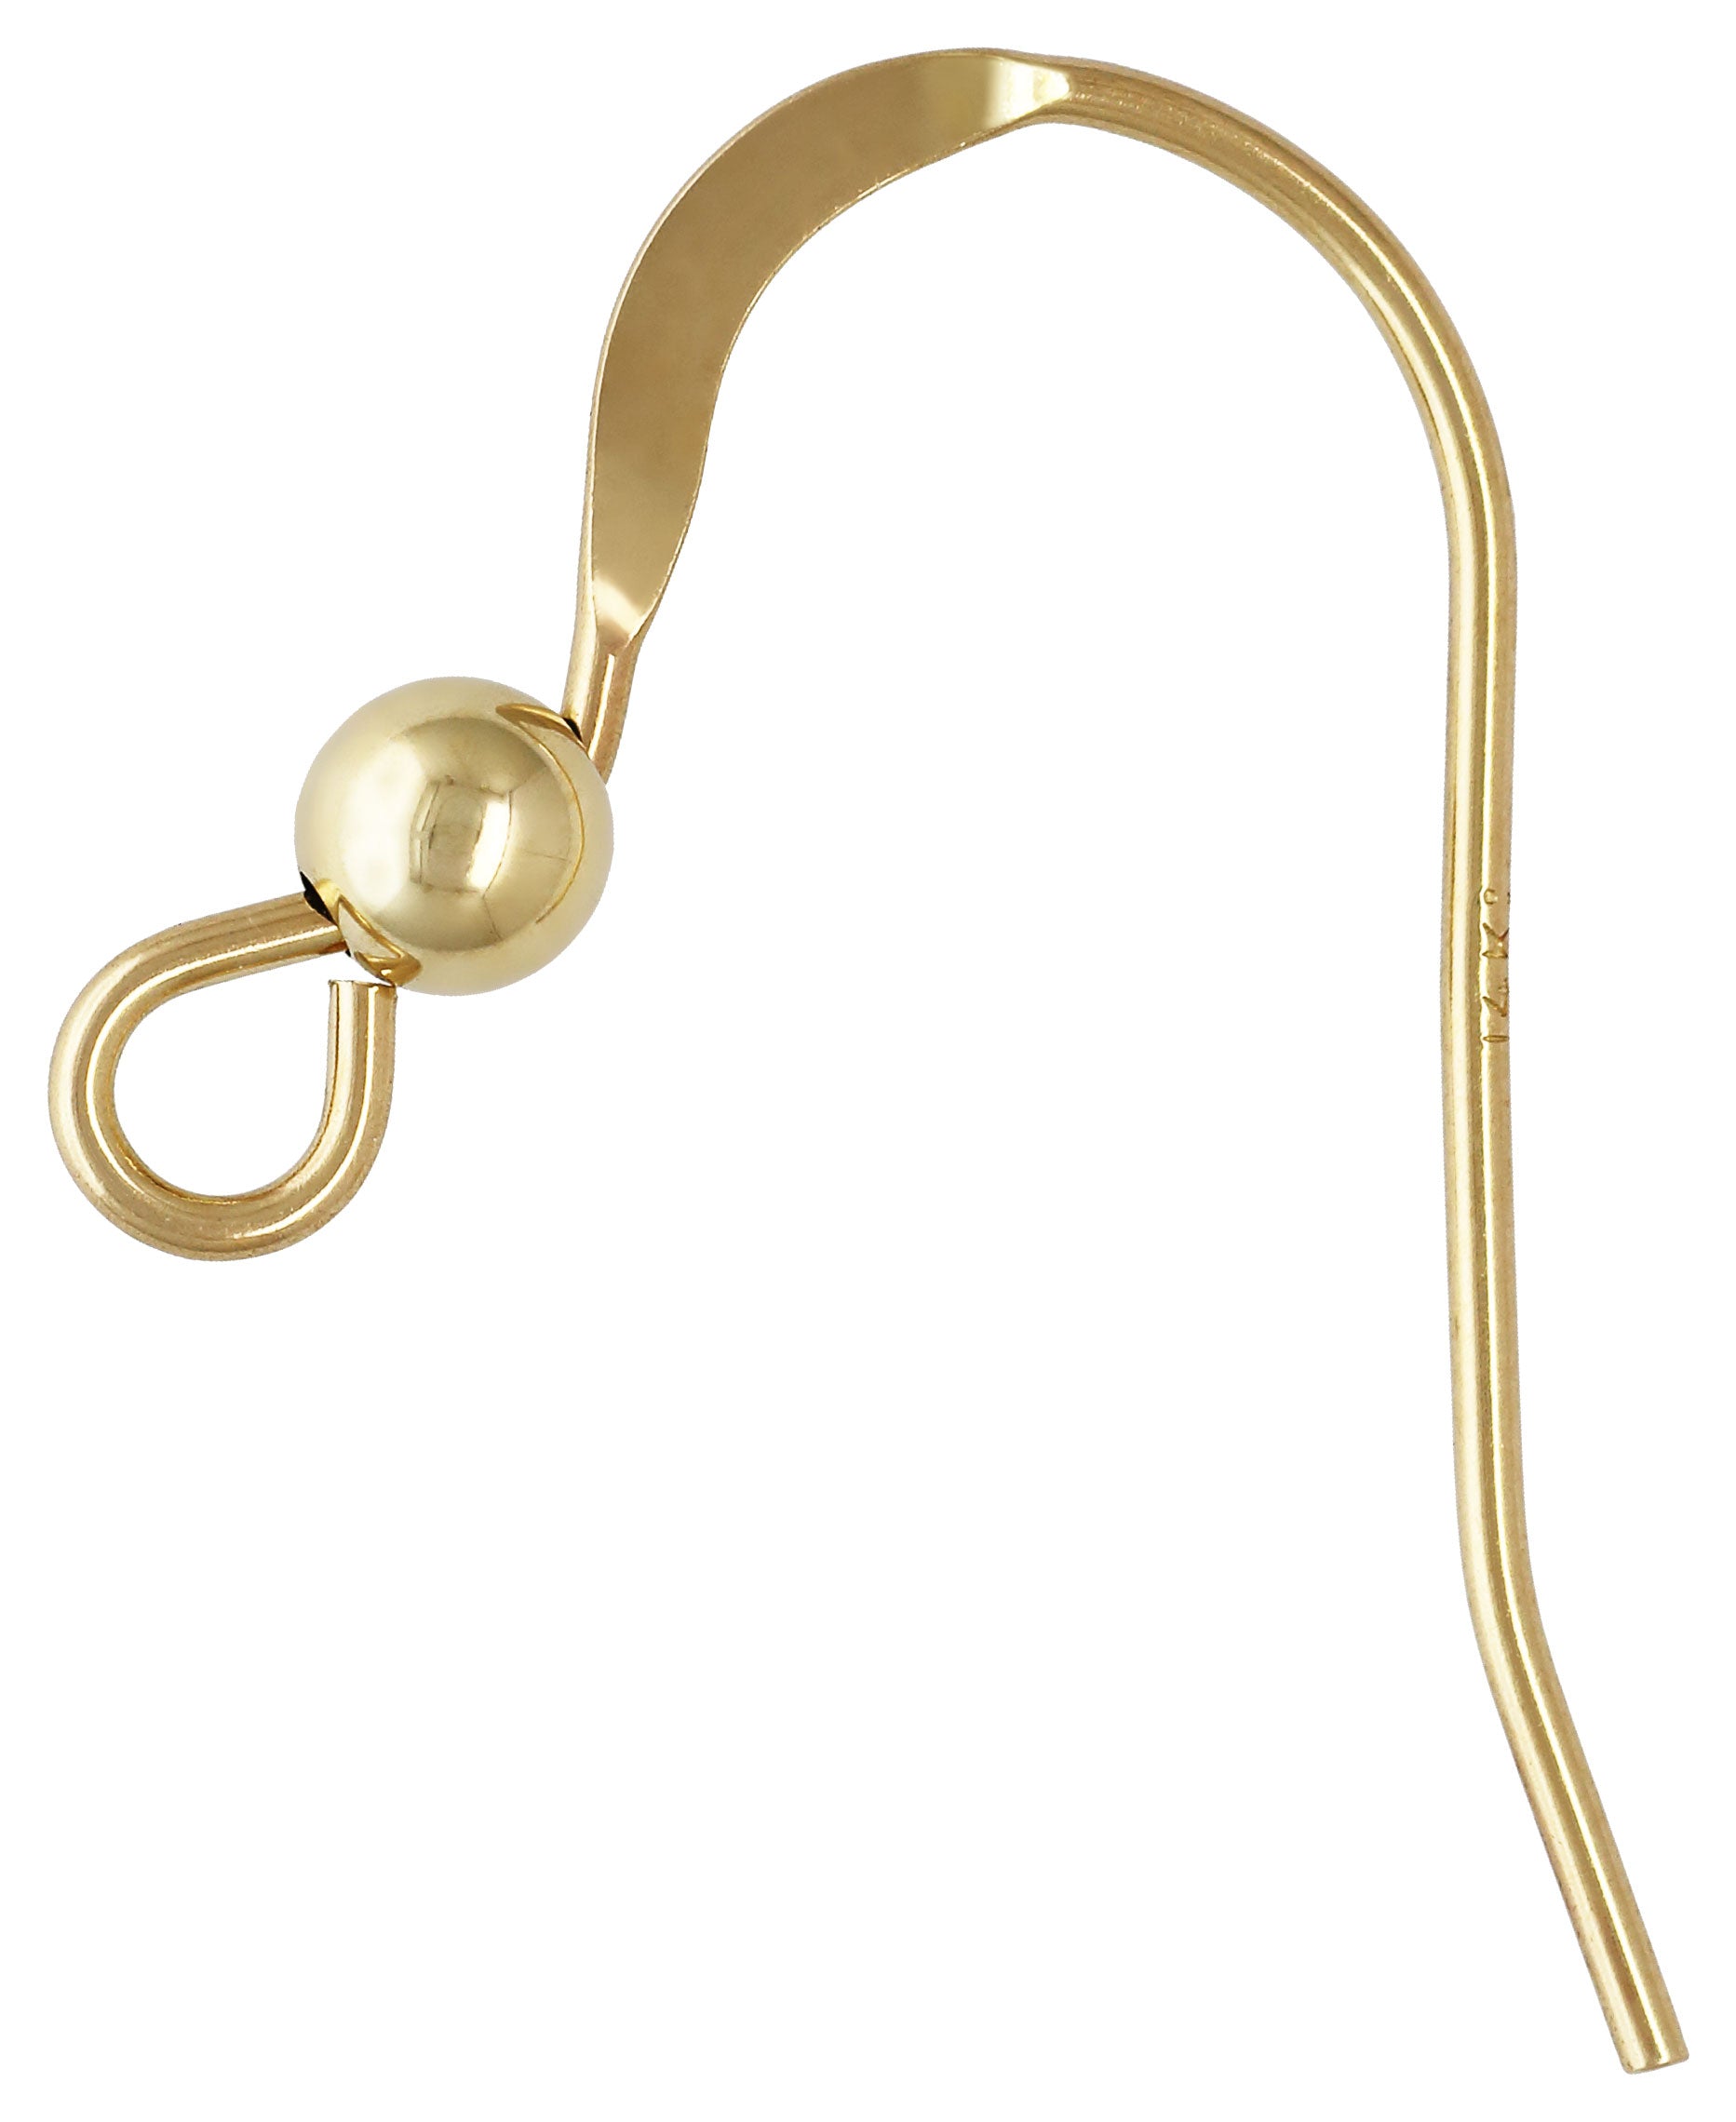 14K Yellow Gold Hammered Ear Wire with Bead, Wire Jewelry Making Earring  Supplies Fishhook. Sold individually